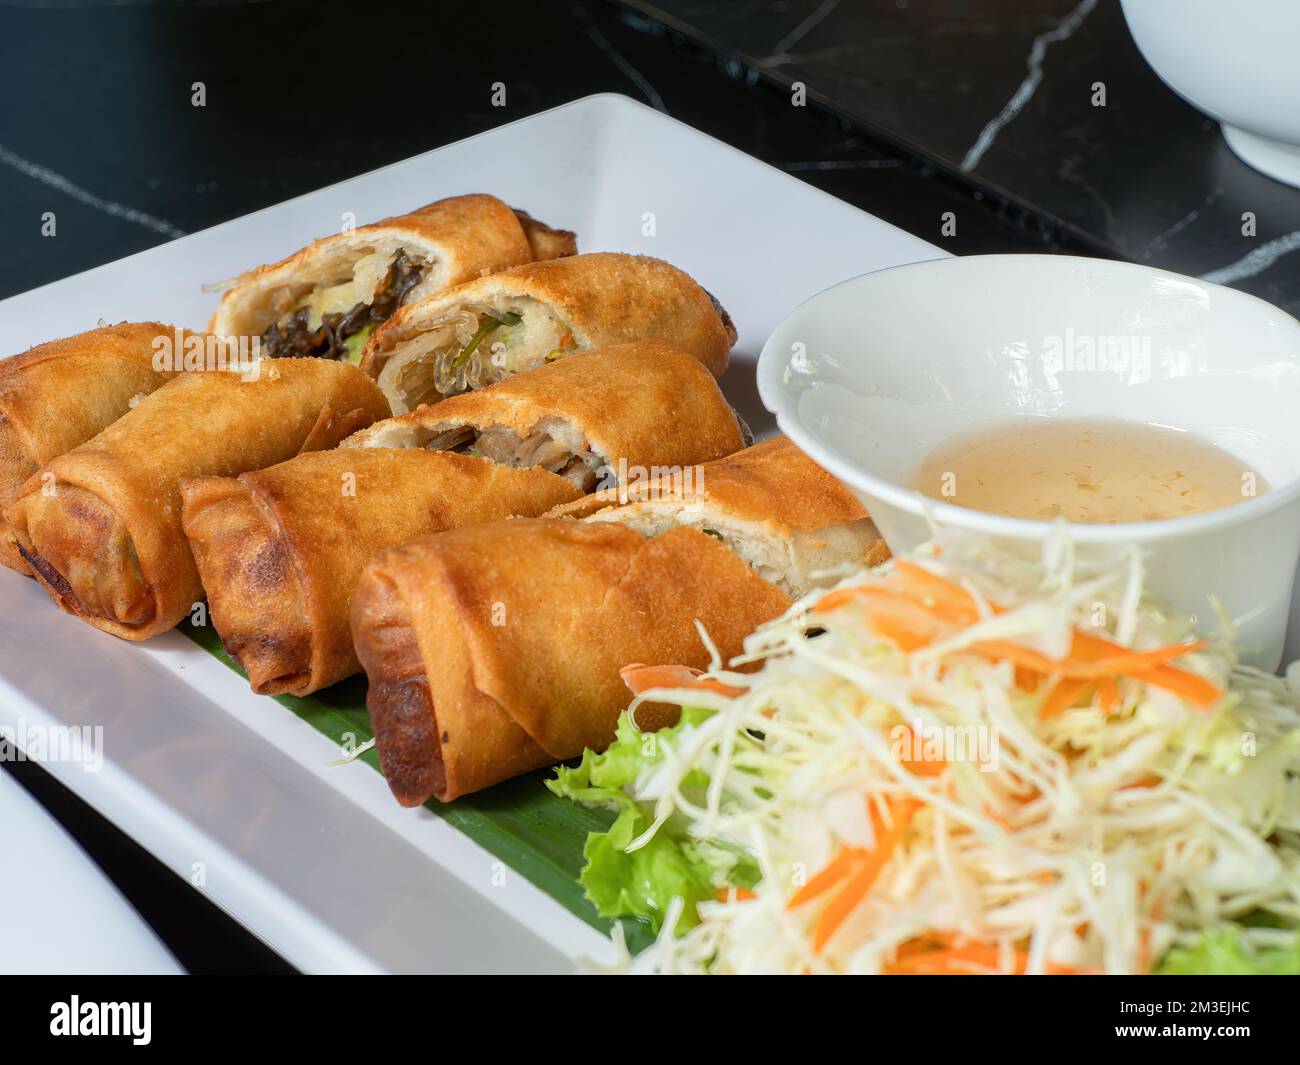 Deep fried spring rolls with mushrooms and glass noodles, a typical East and Southeast Asian appetizer. Stock Photo